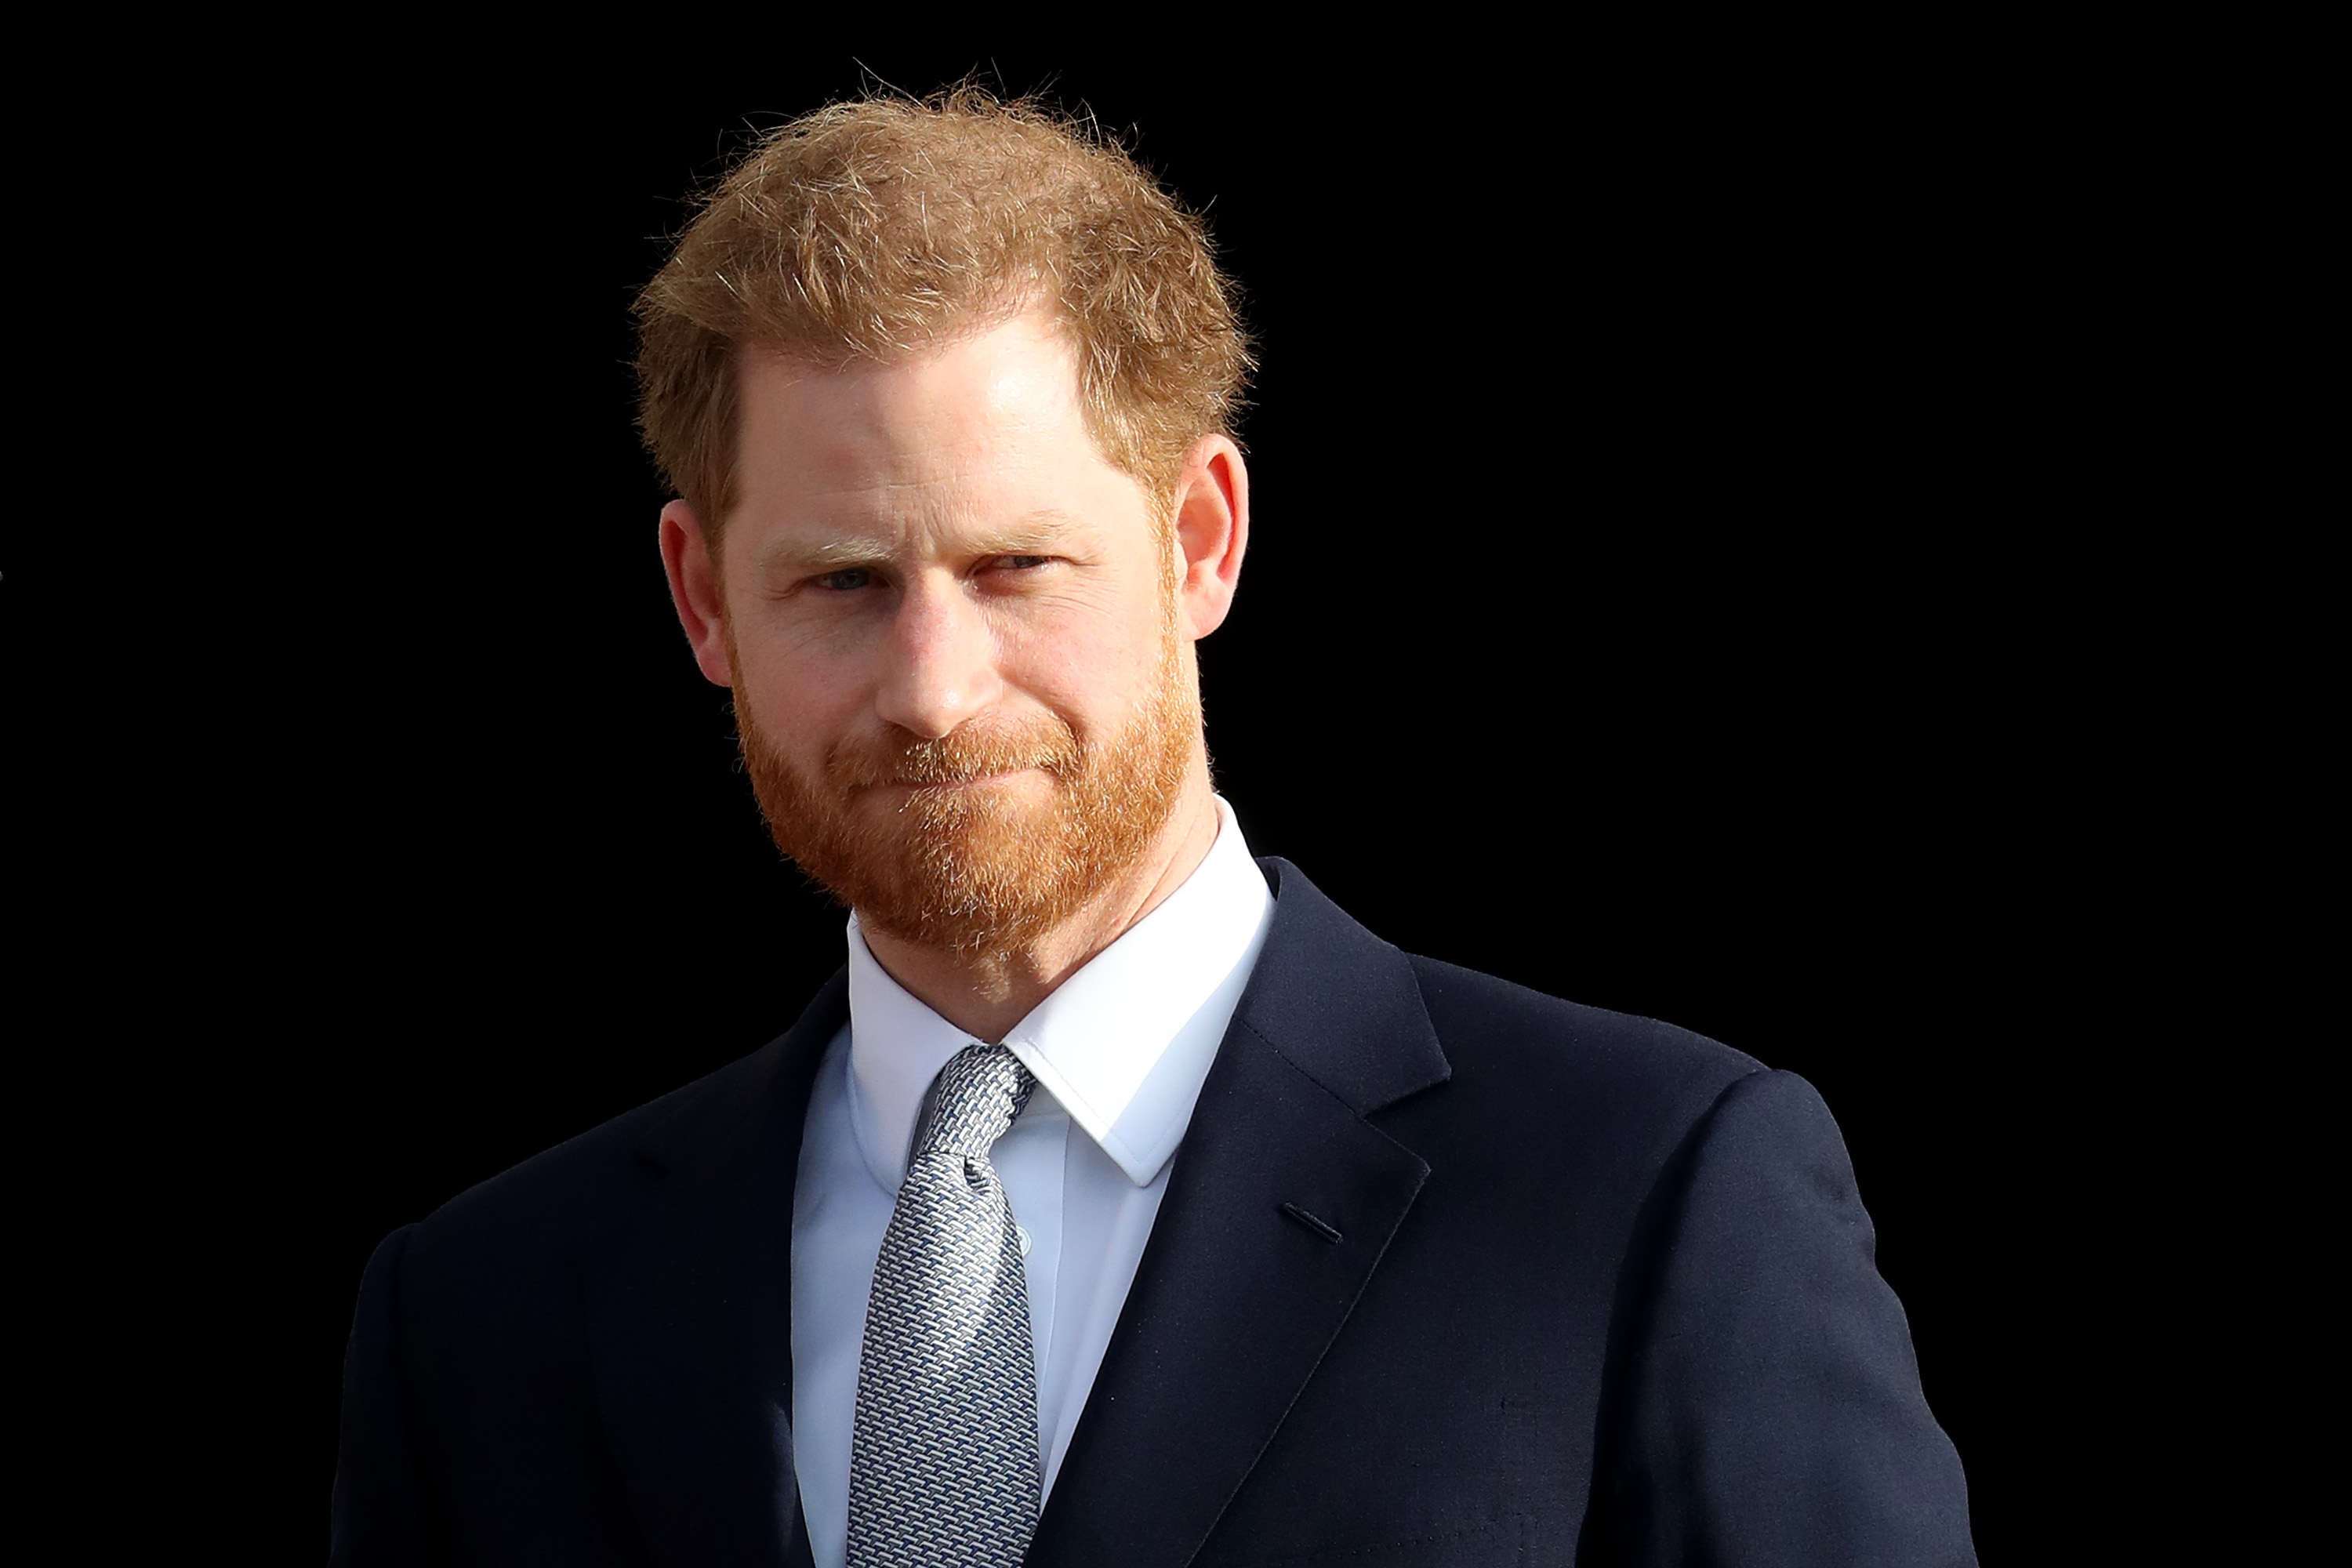 Prince Harry photographed in a suit while hosting the Rugby League World Cup 2021